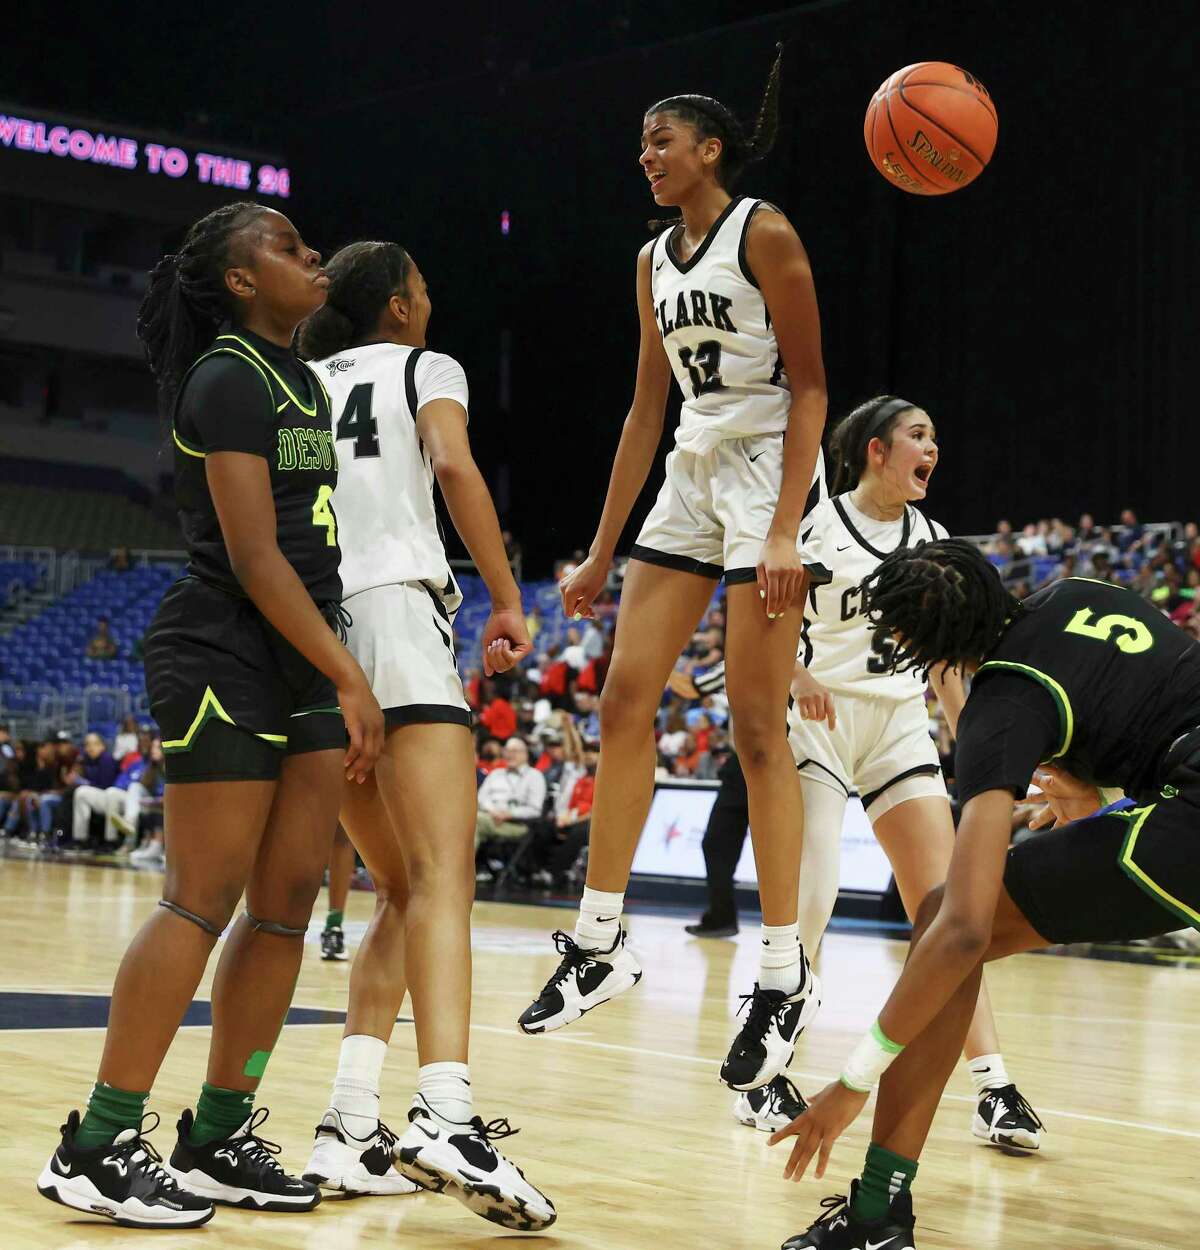 Clark's Arianna Roberson (12) leaps into the air after scoring a shot at the buzzer against DeSoto in the UIL Class 6A girls basketball semifinal game at the Alamodome on Friday, Mar. 4, 2022.